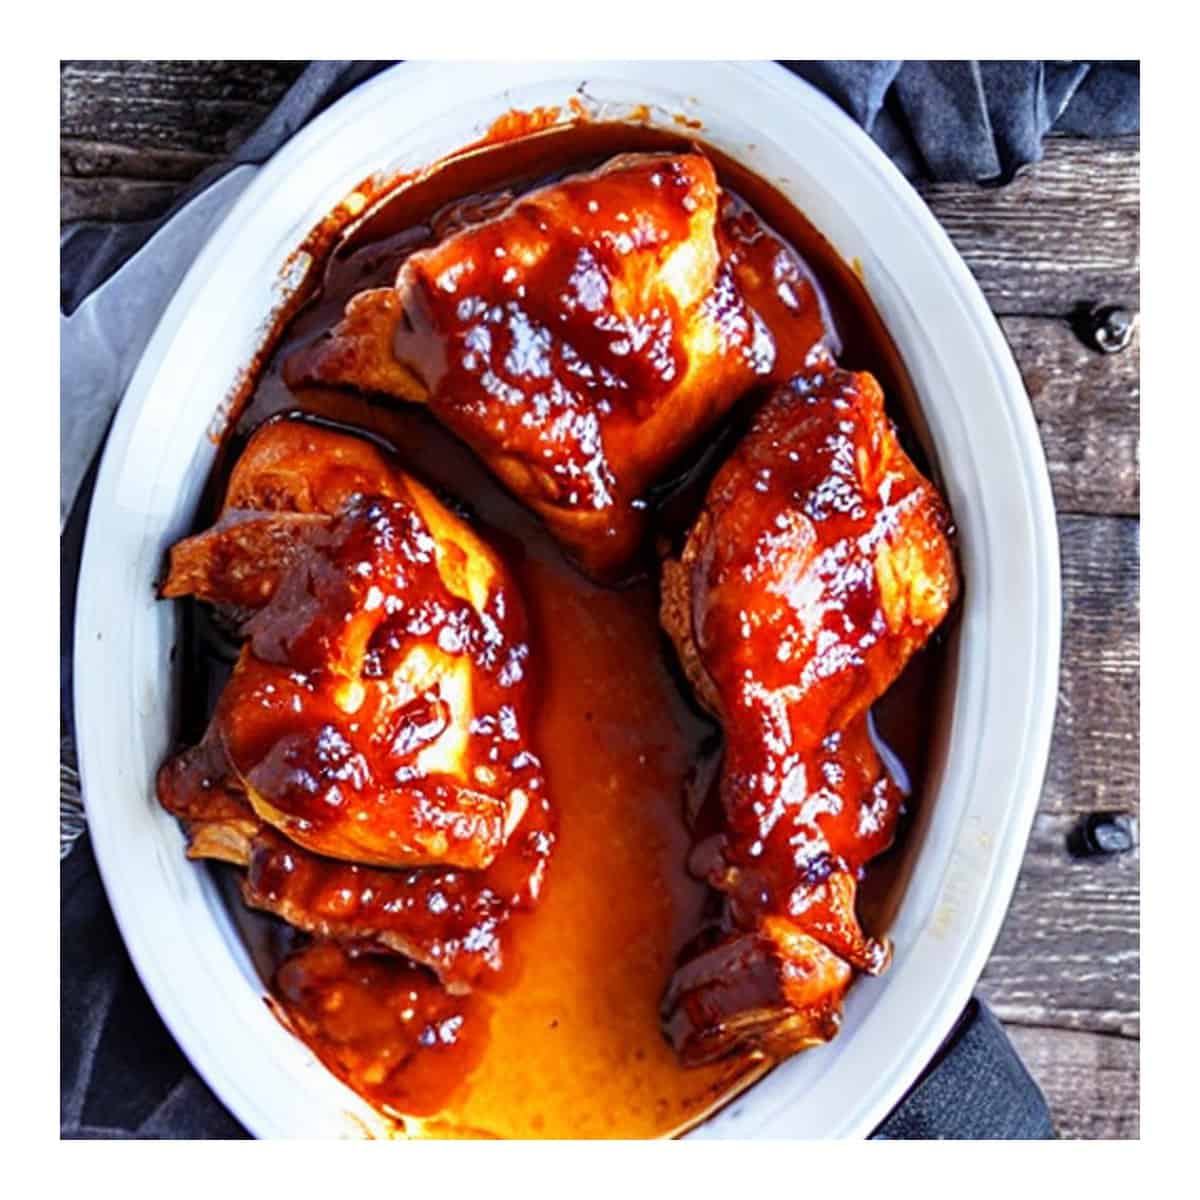 Easy Oven Barbecue Chicken With Honey Bourbon Chipotle Sauce